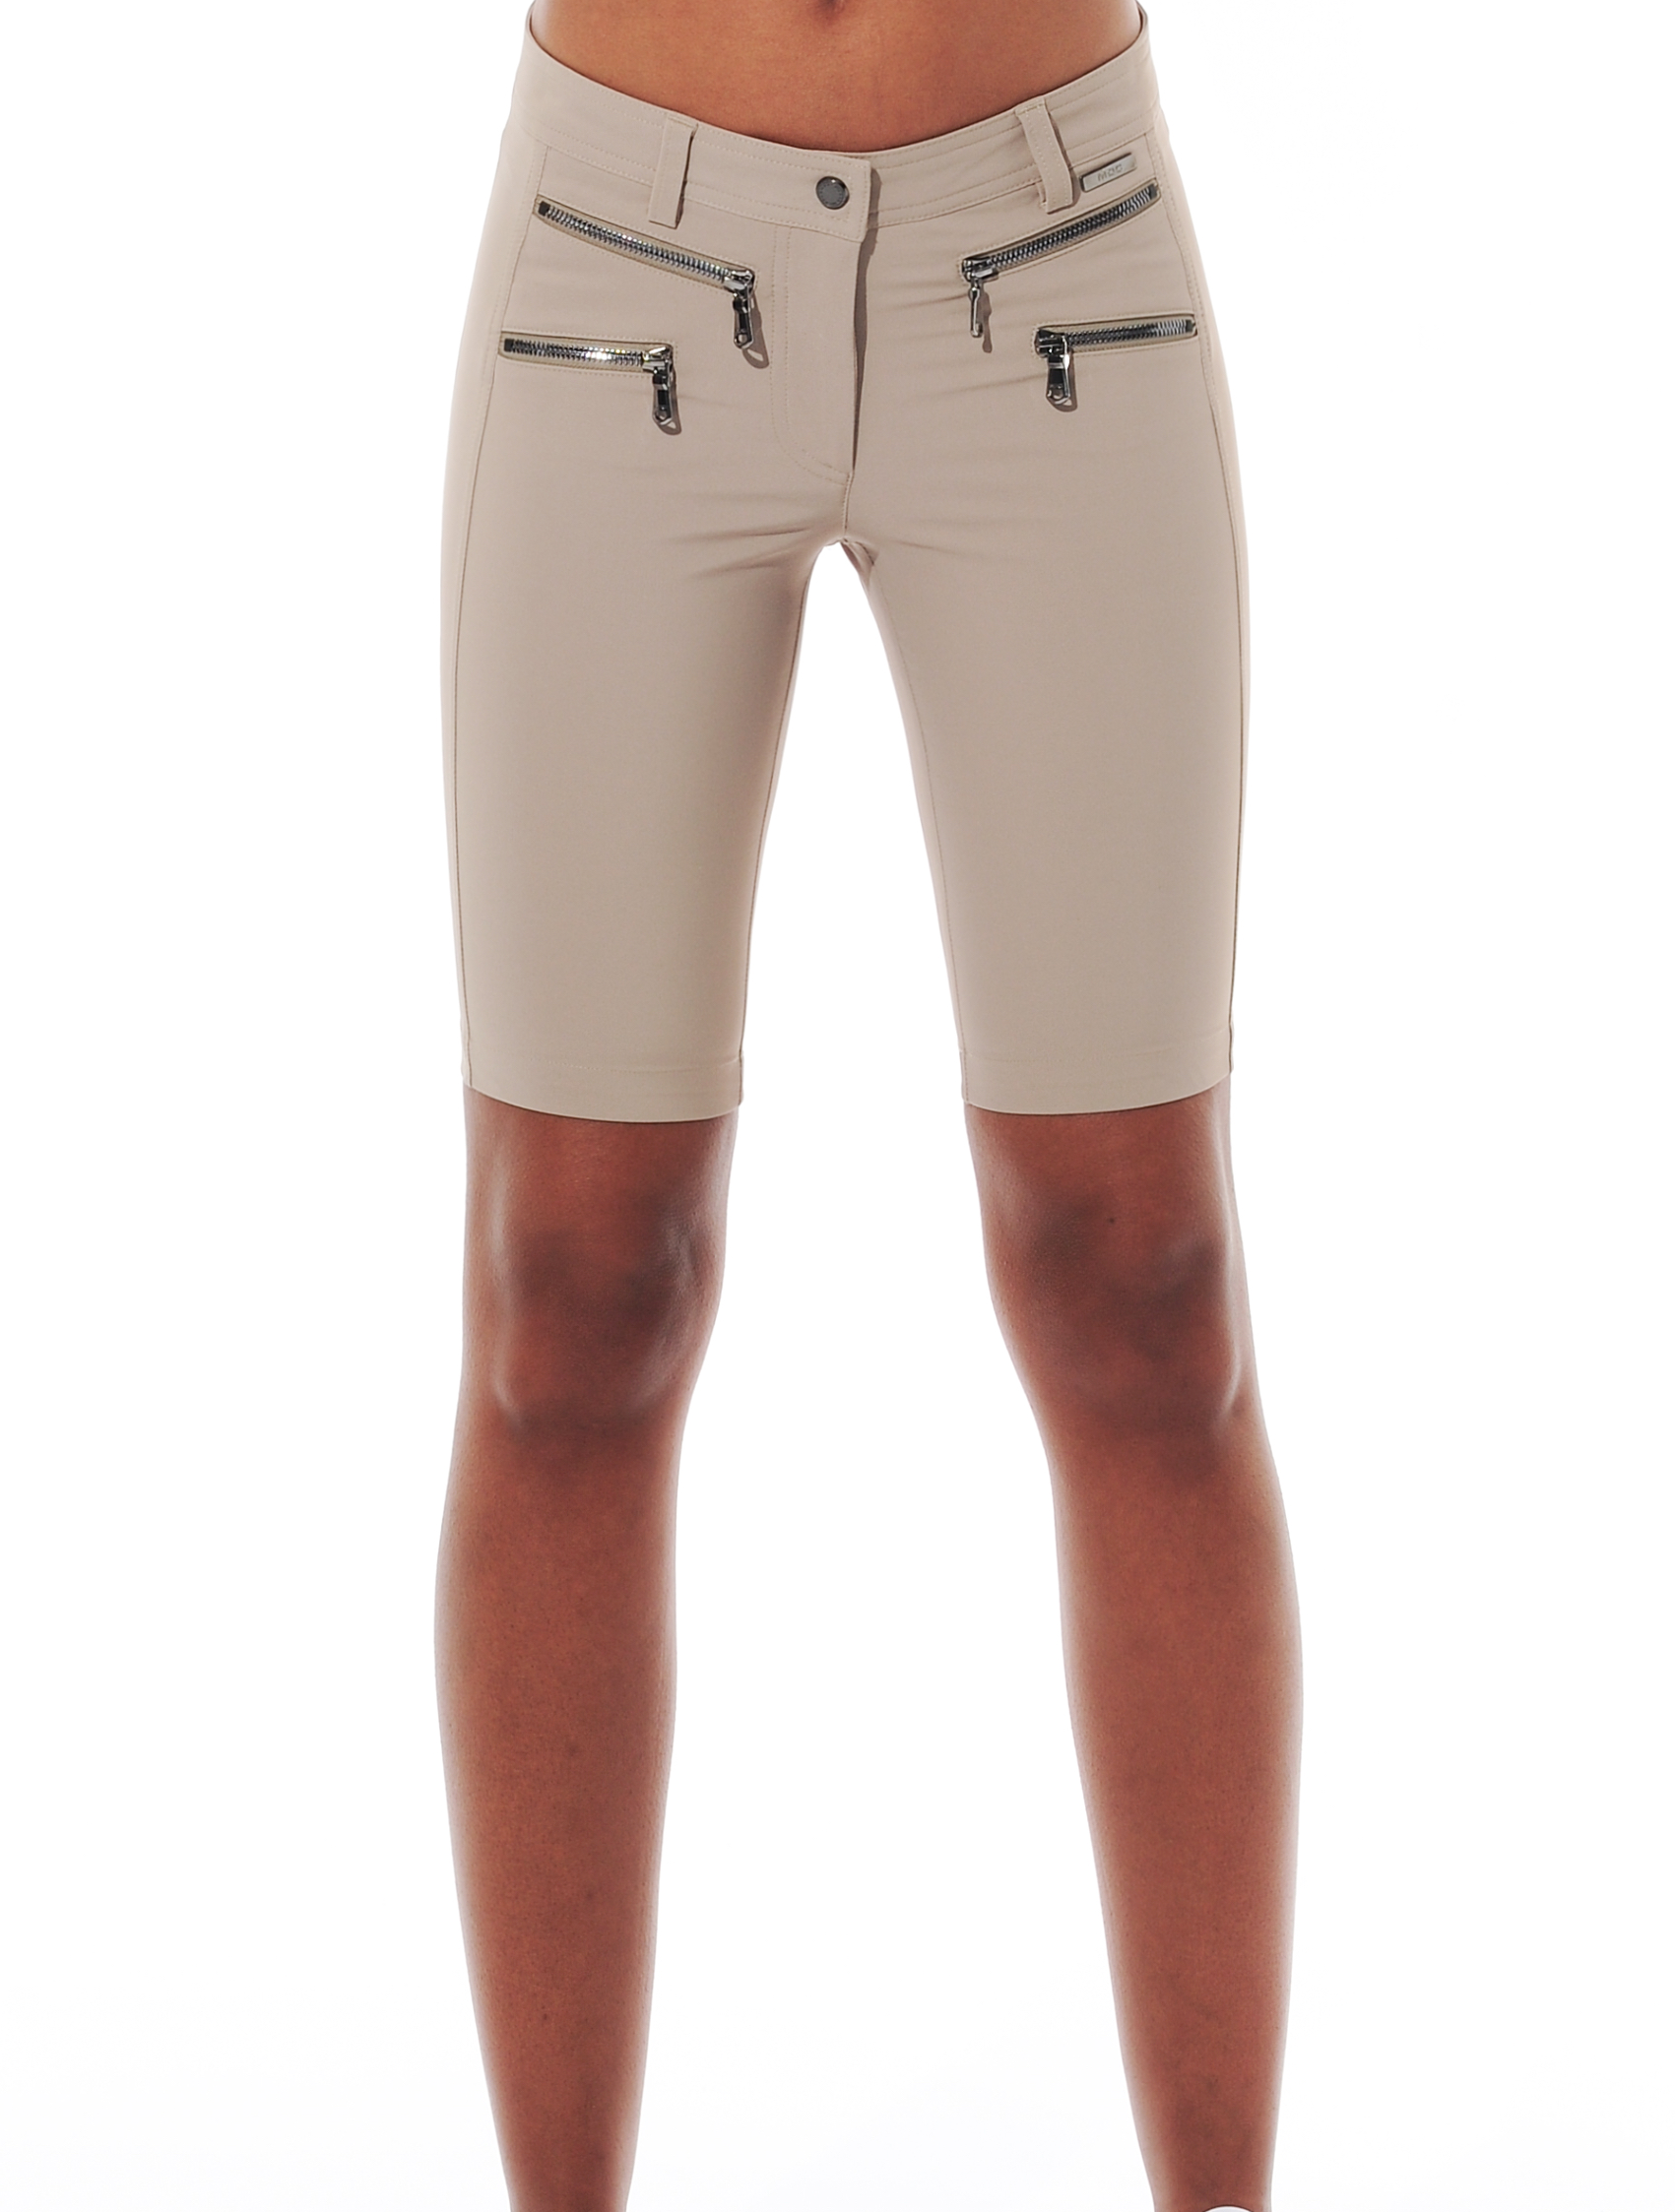 4way stretch double zip shorts taupe 